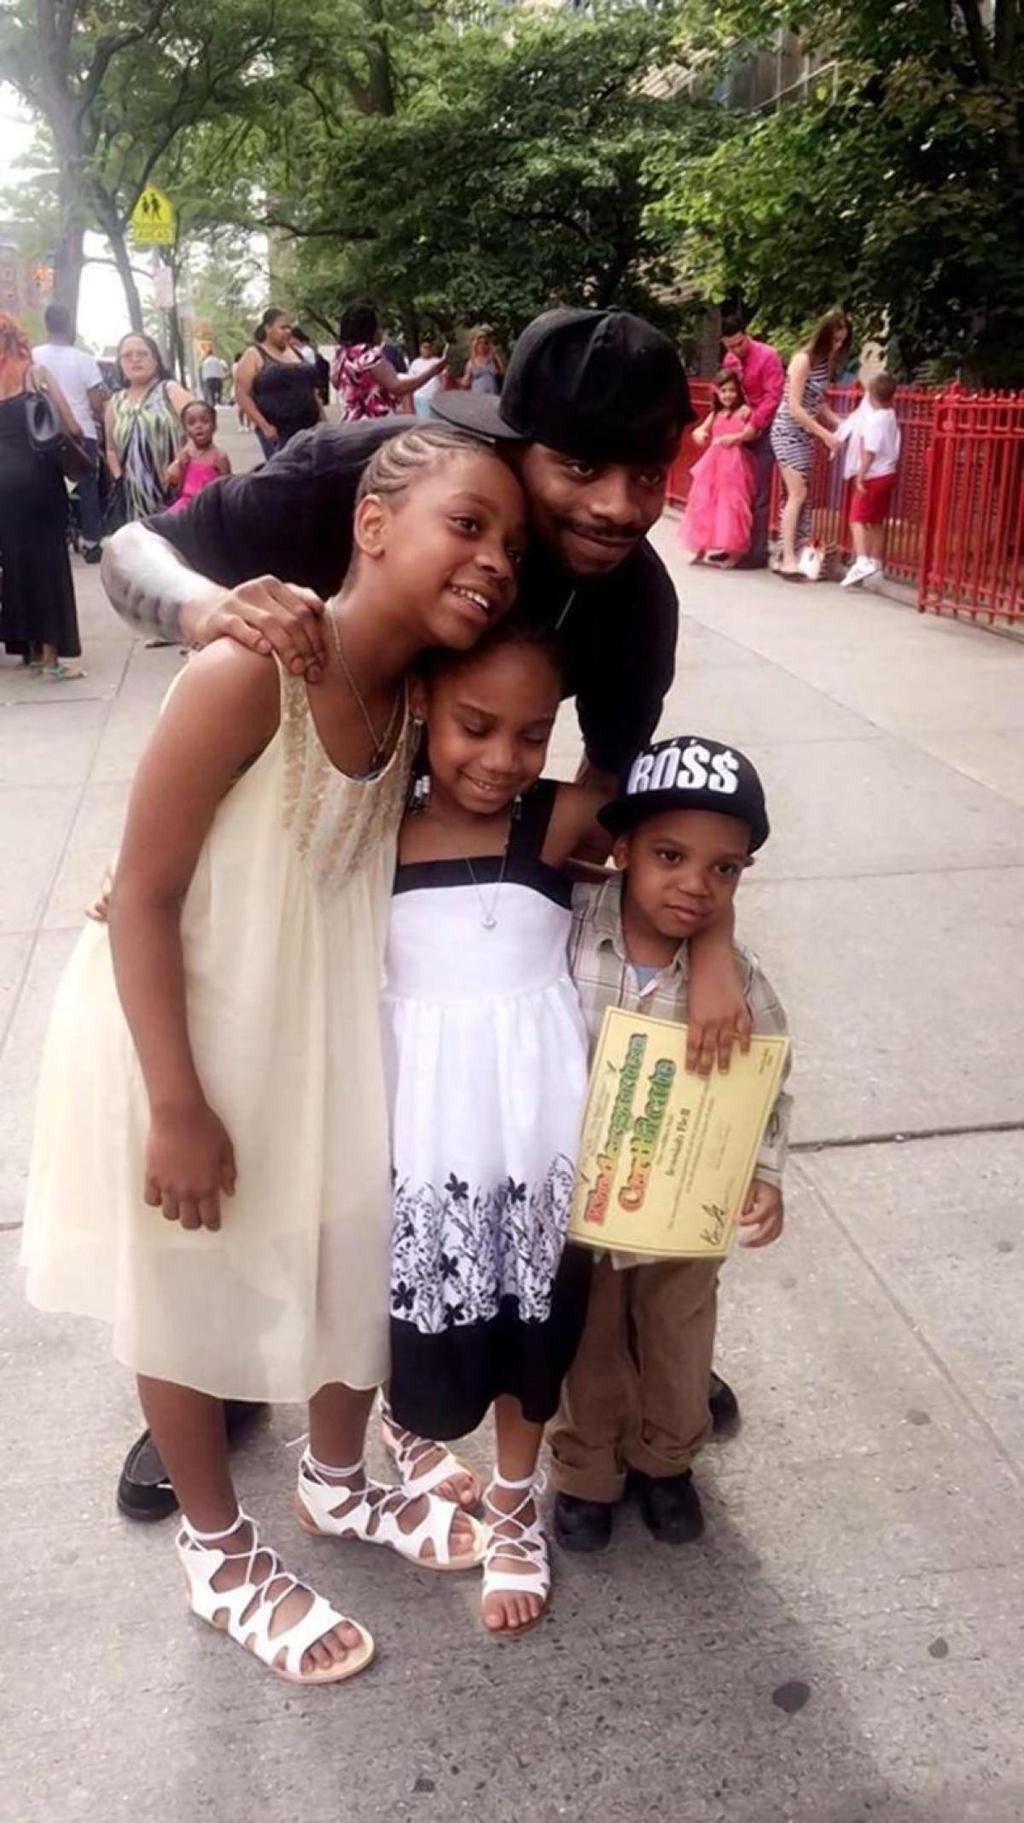 Damian Bell is now raising his kids Danielle, Jessiah and Damien Jr. as a single dad in the wake of Jessica's murder.